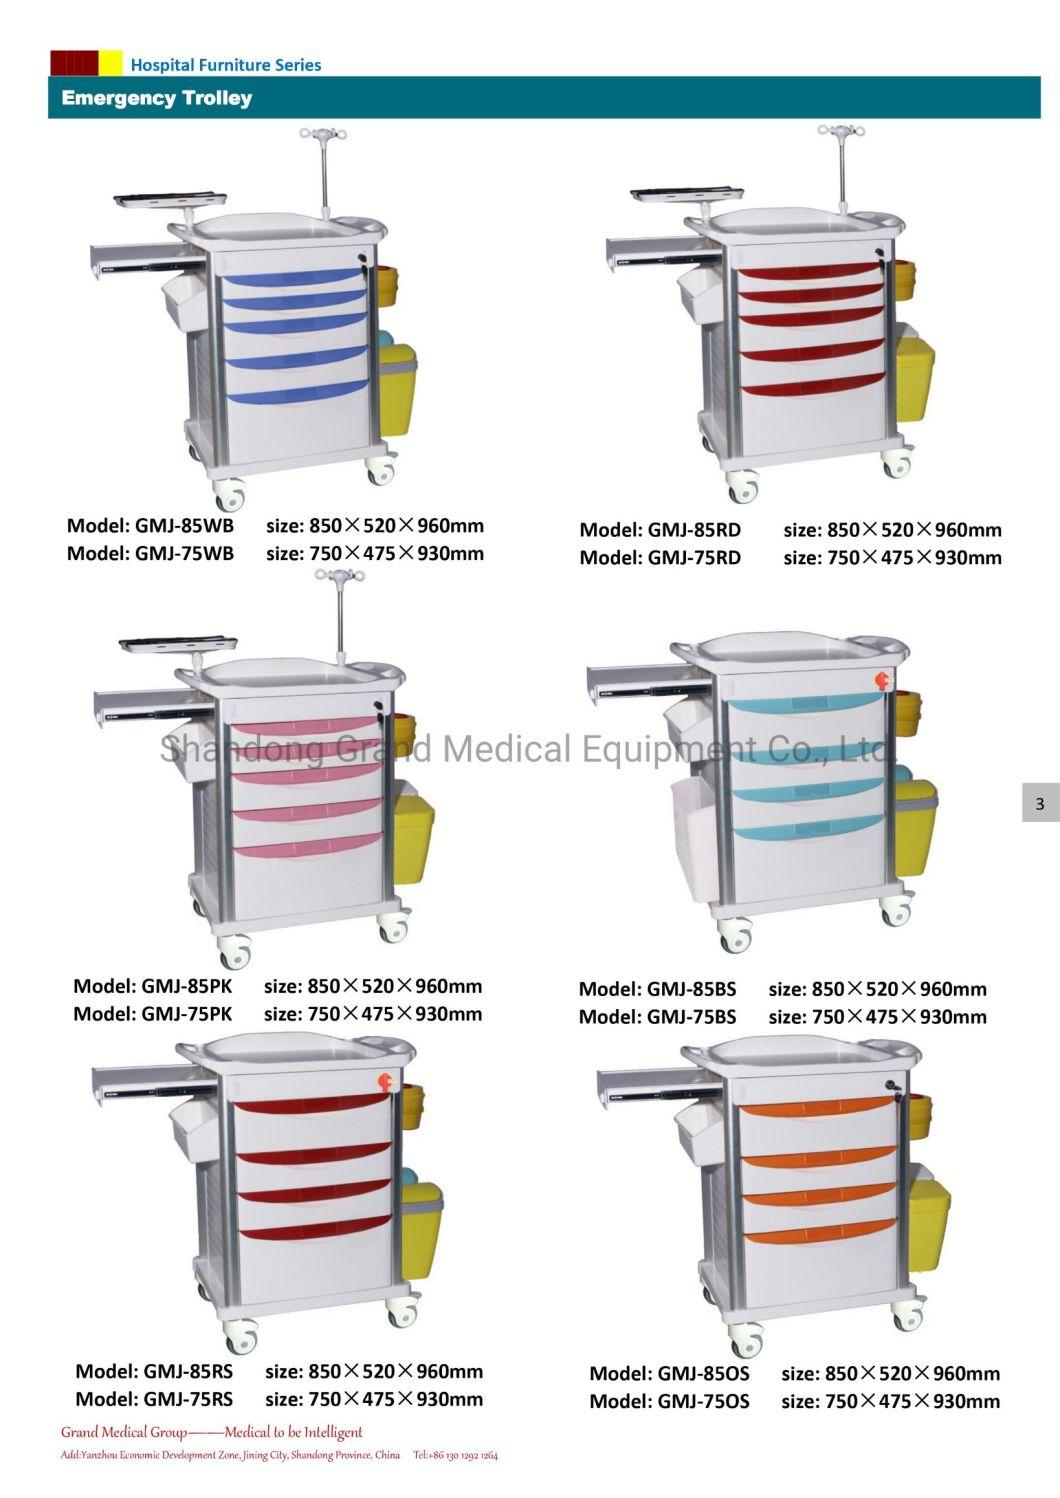 China Hospital Mobile Medical Trolley Medical Emergency Cart Modern Design ABS Material with Casters Hospital Furniture in Stock